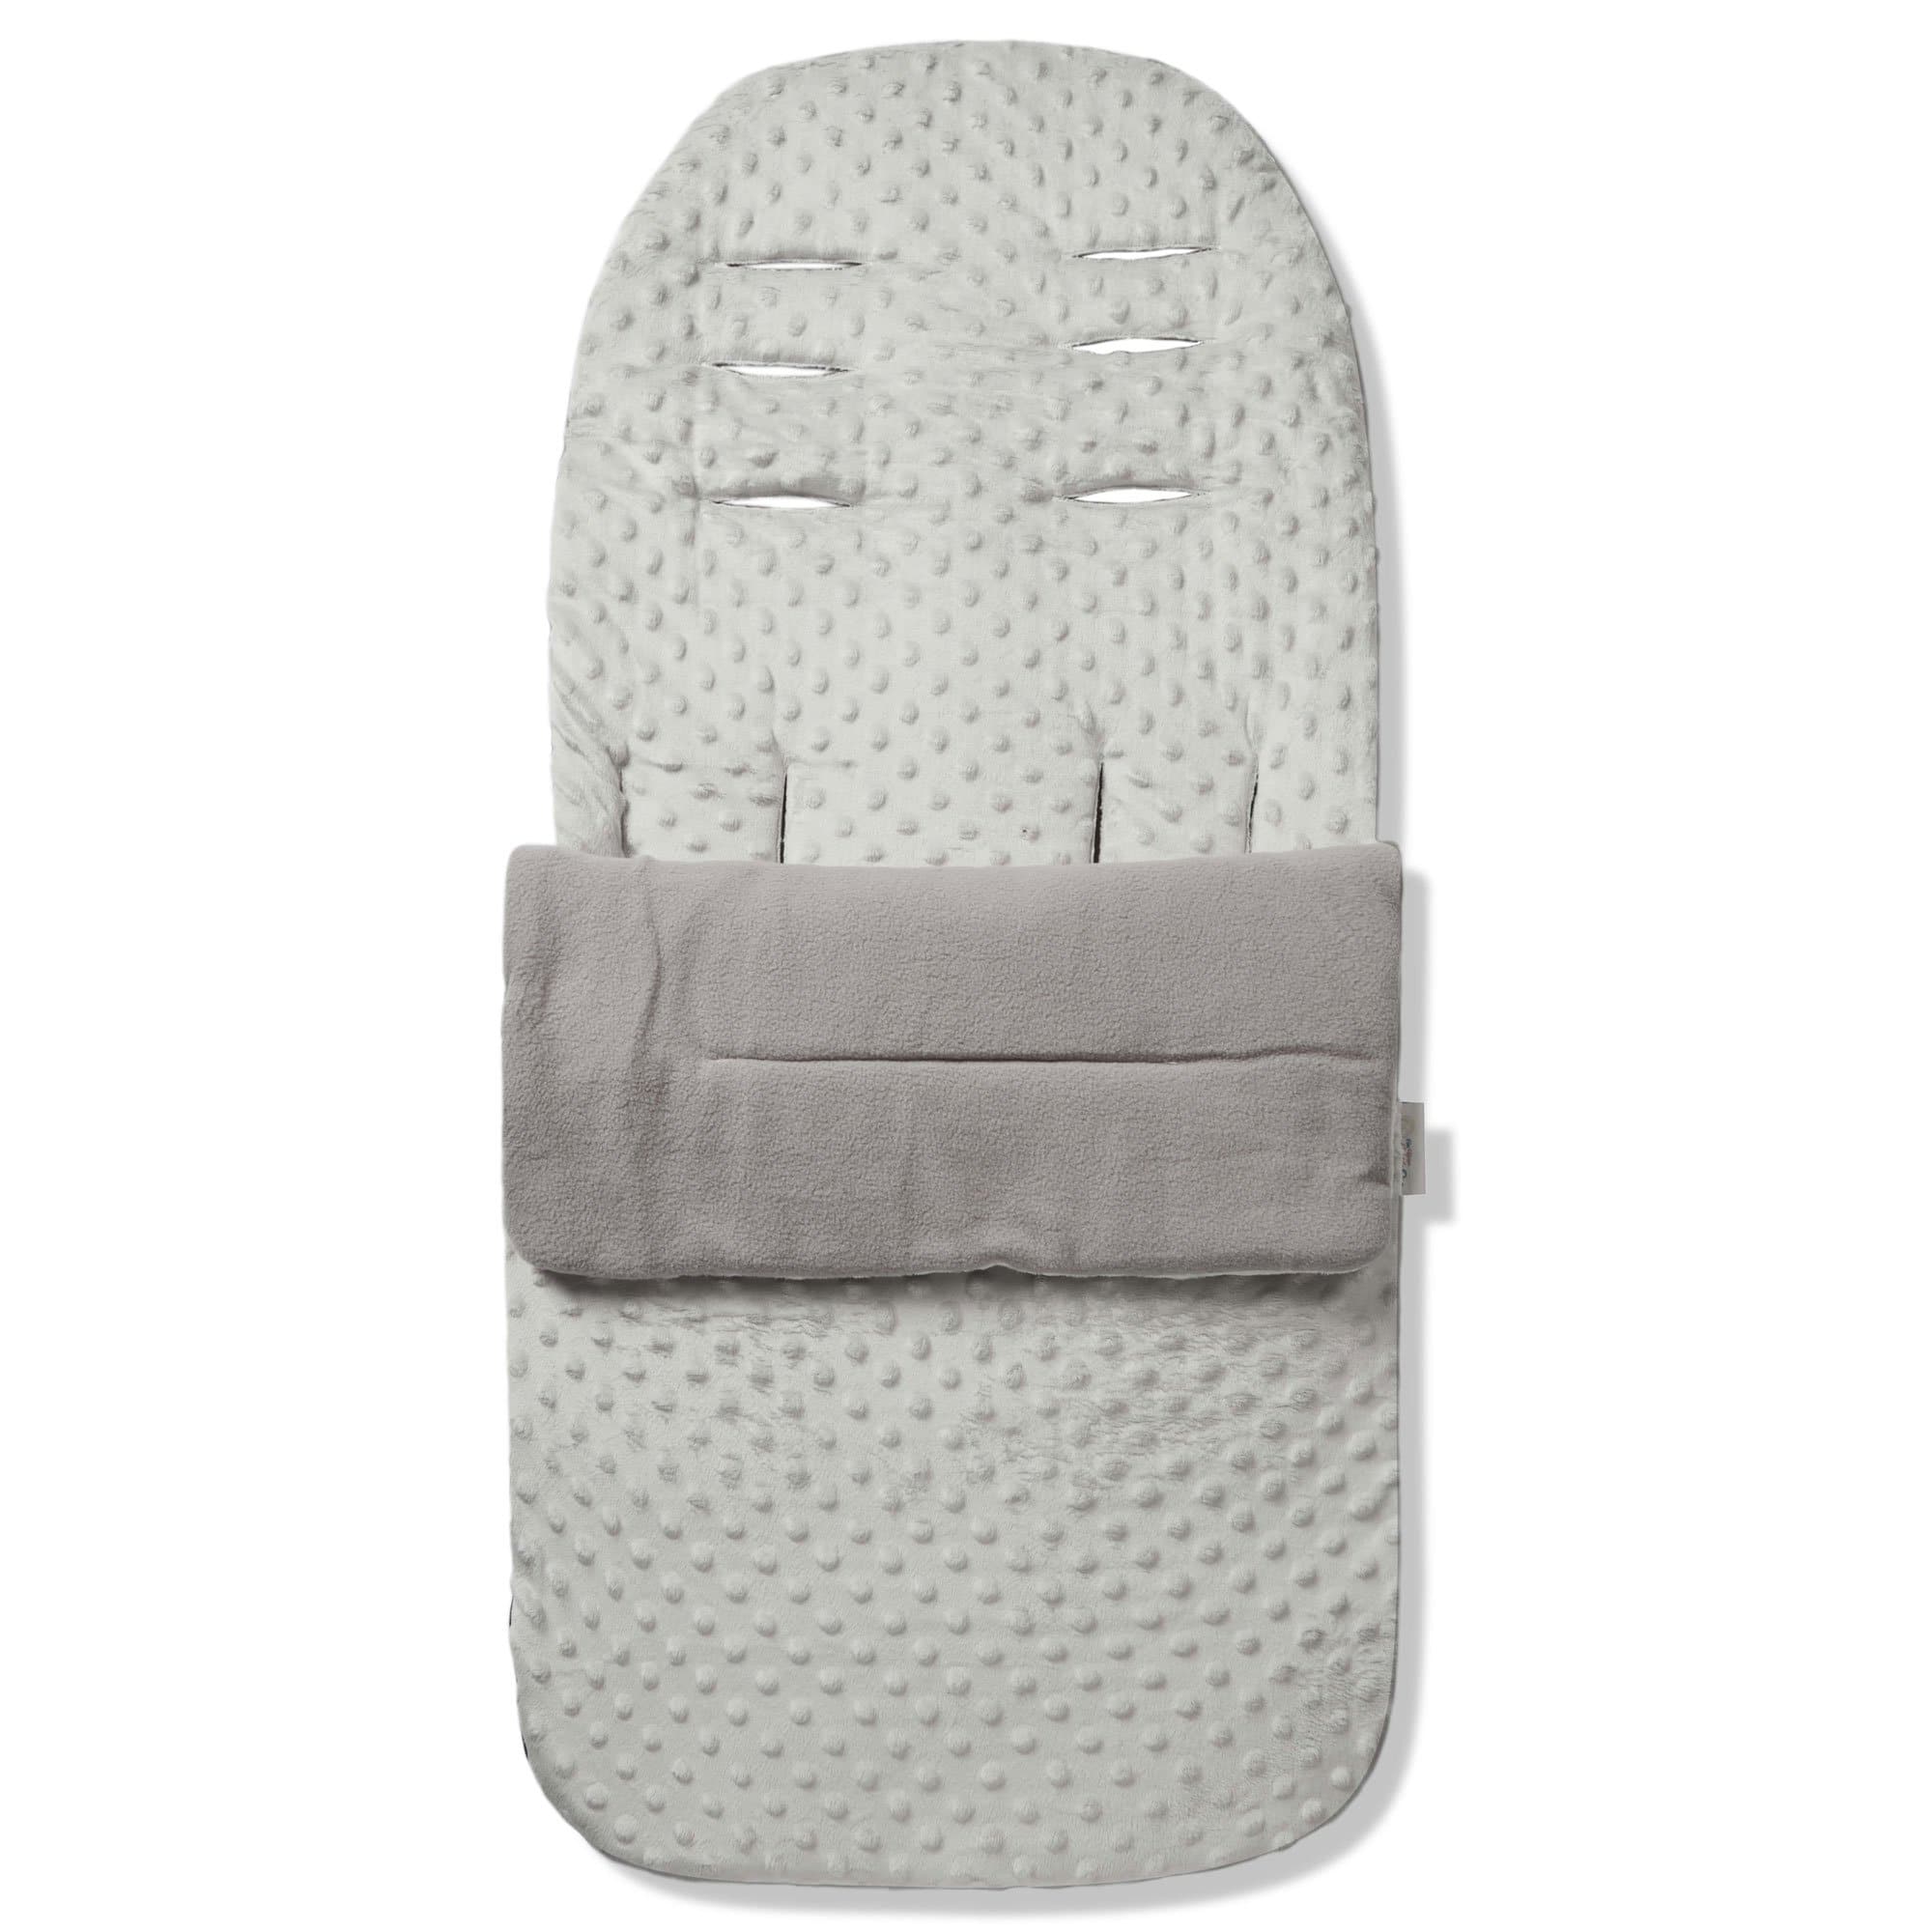 Universal Dimple Footmuff / Cosy Toes - Fits All Pushchairs / Prams & Buggies - Grey / Fits All Models | For Your Little One